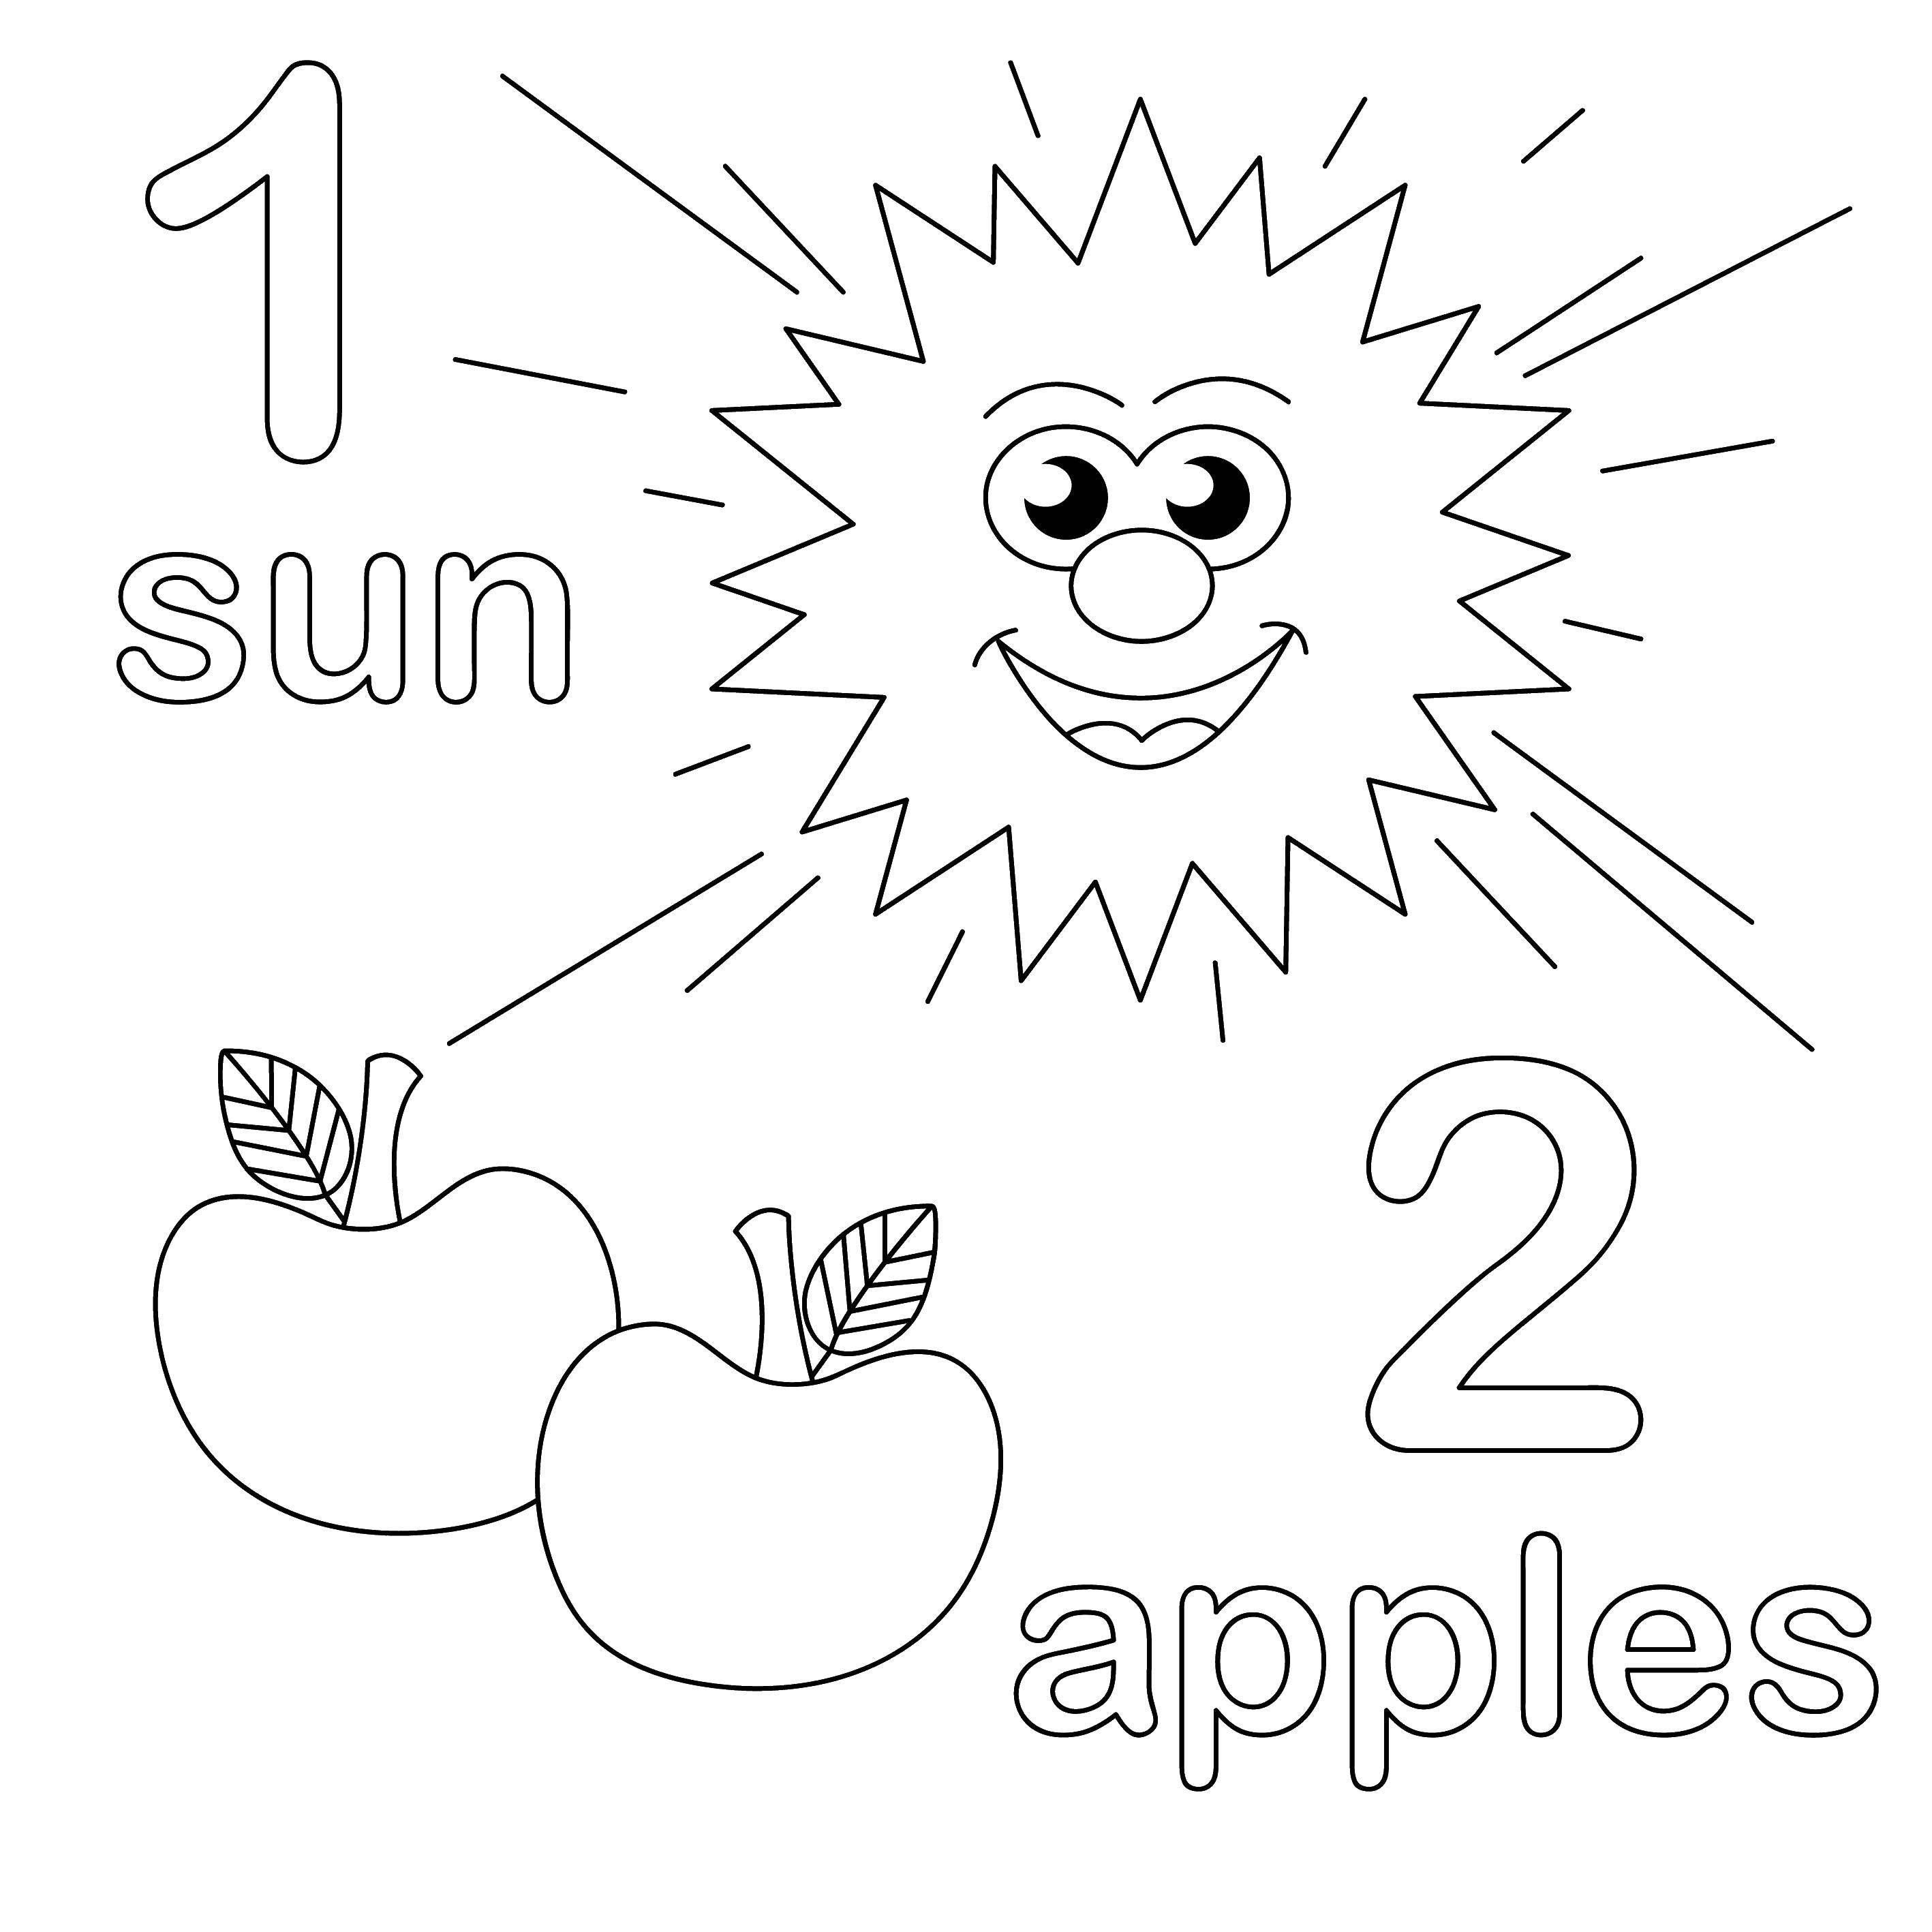 Coloring One sun and two apples. Category coloring. Tags:  Numbers , account numbers.